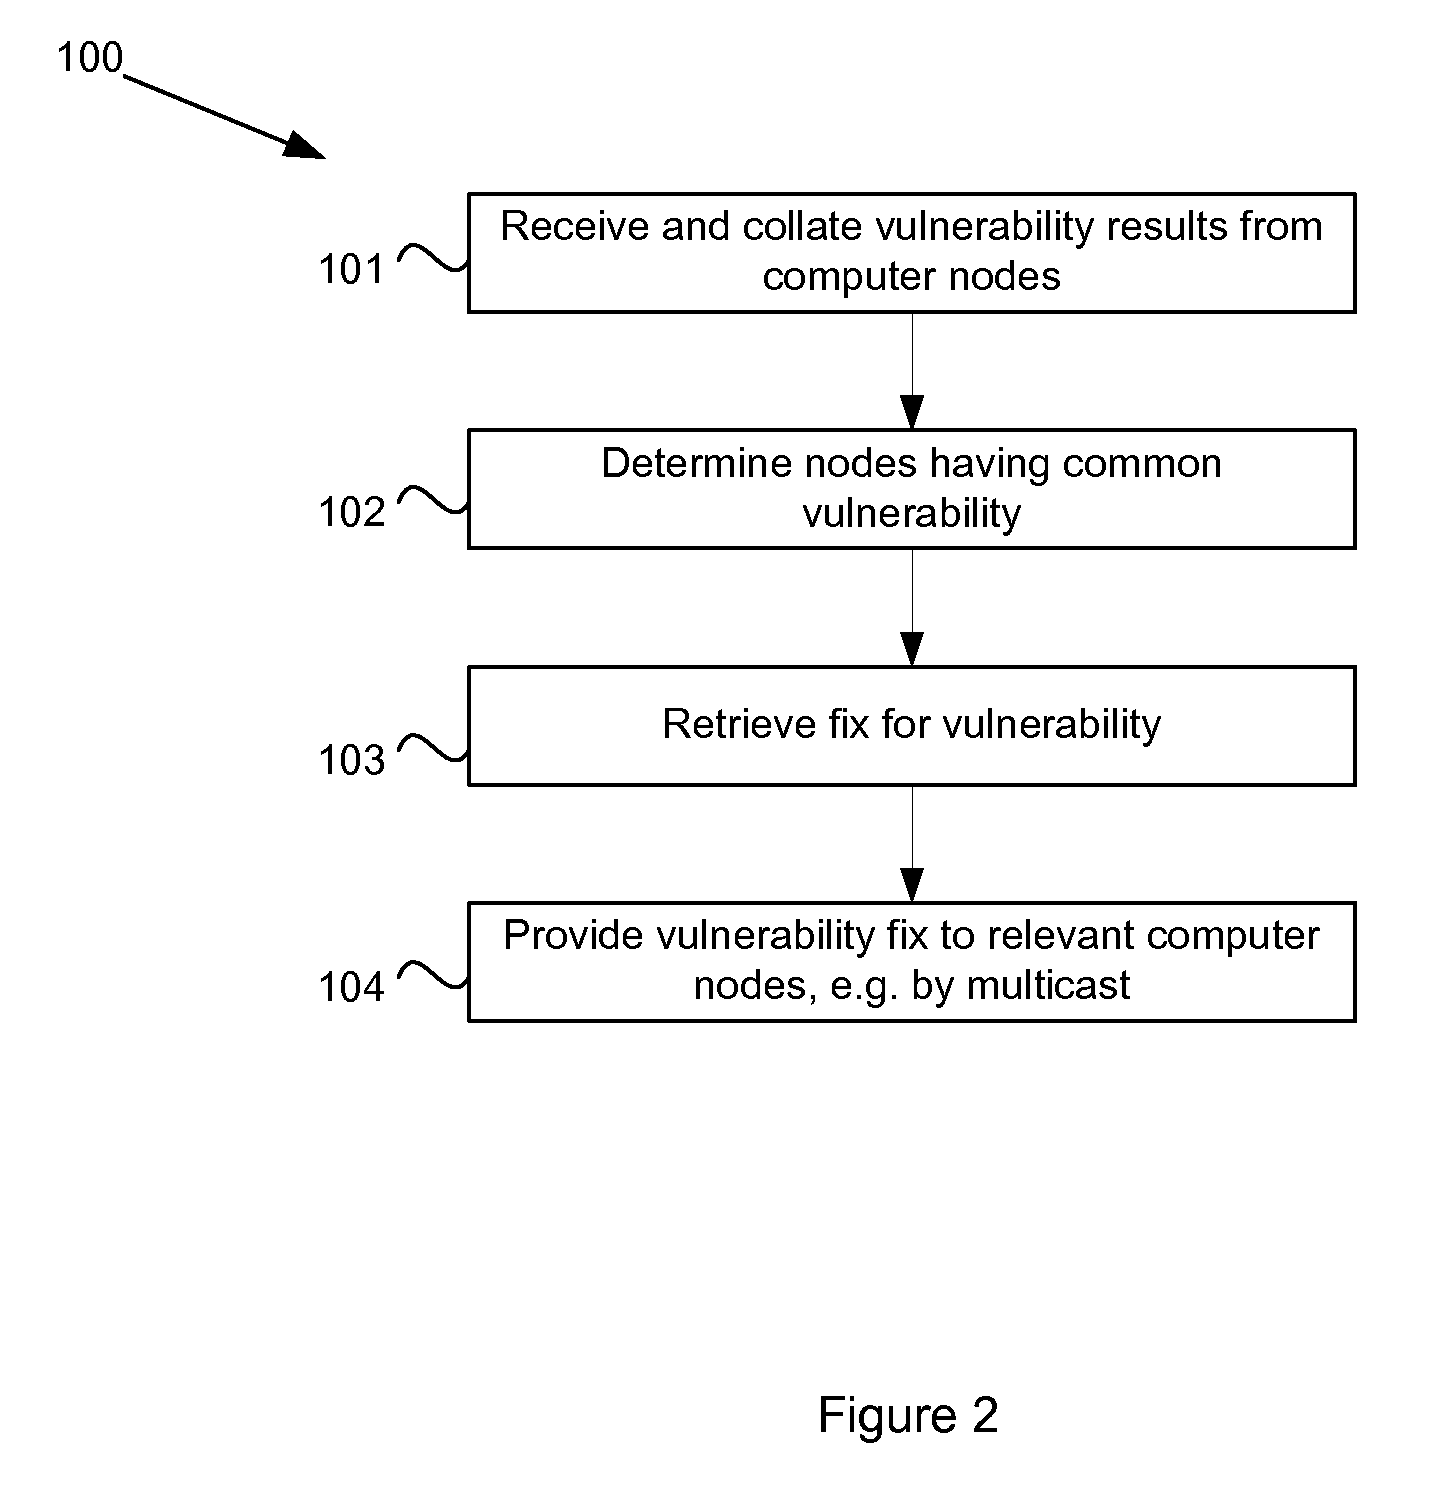 System and method for resolving vulnerabilities in a computer network